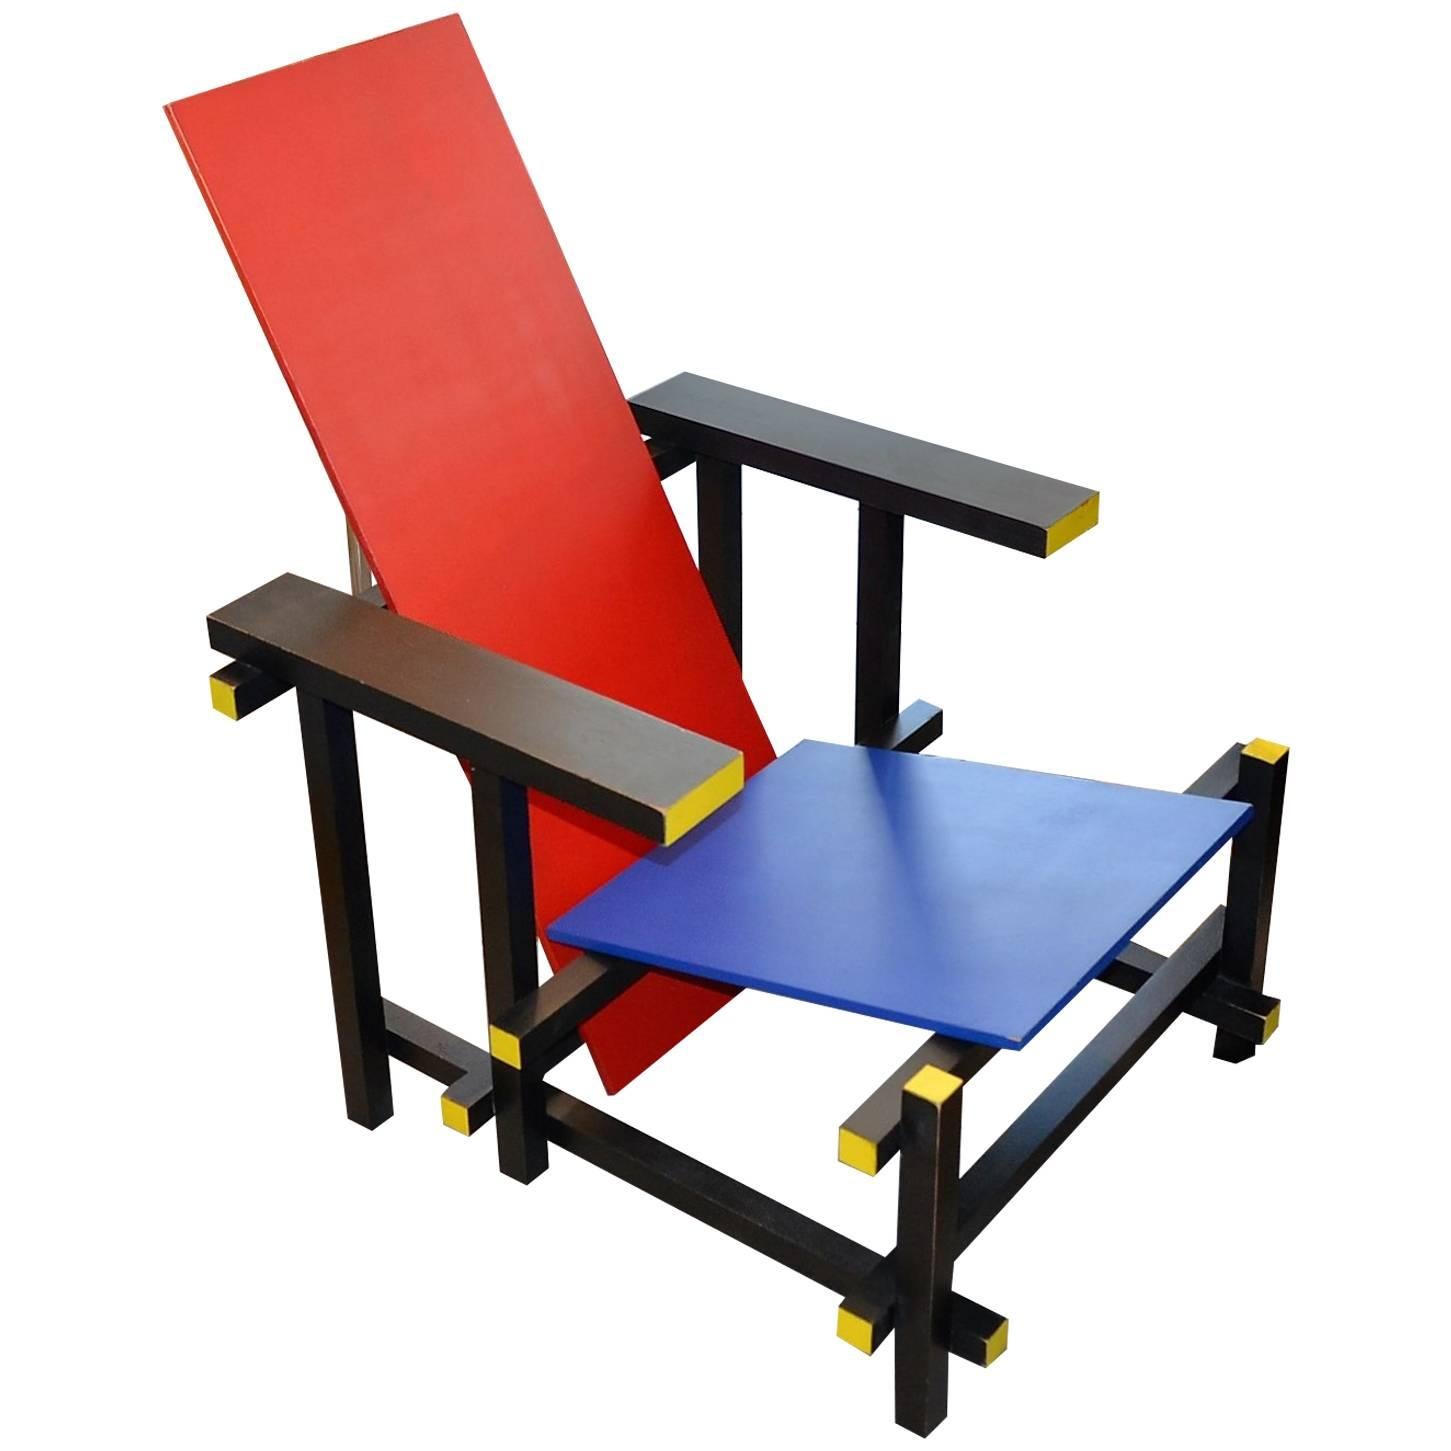 Red and Blue Chair by Thomas Rietveld for Cassina